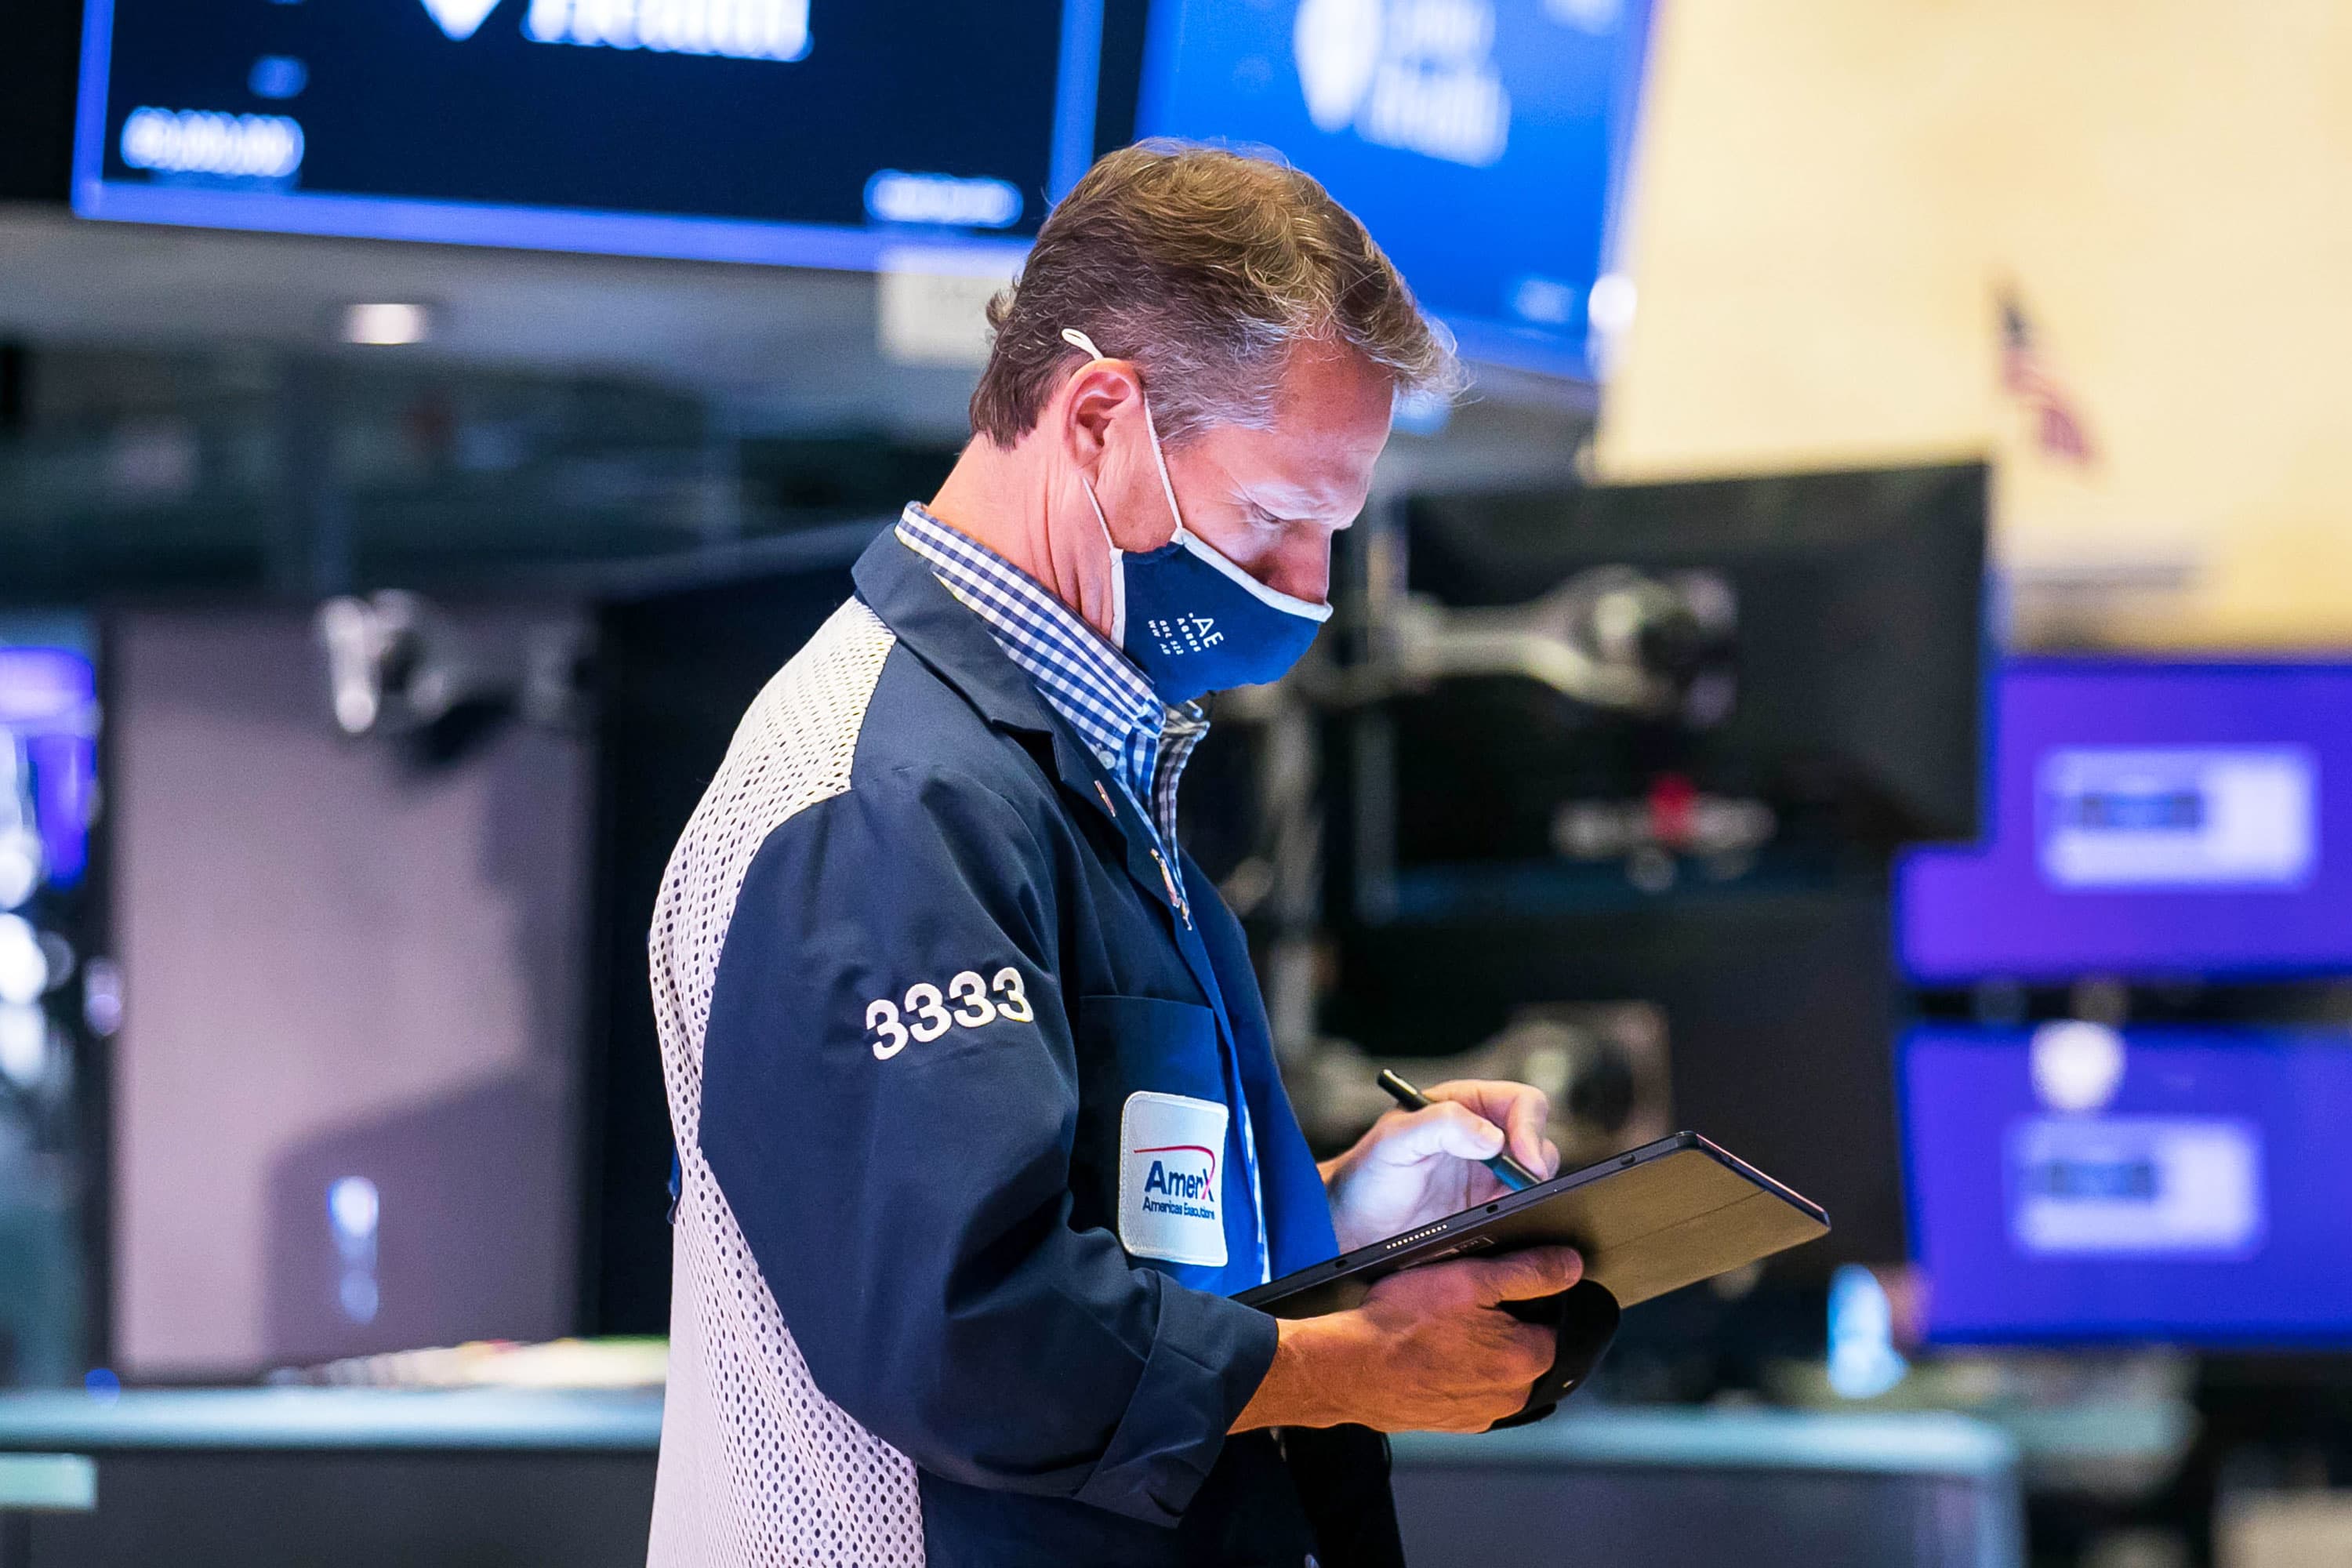 The standard US stock exchanges have weakened today